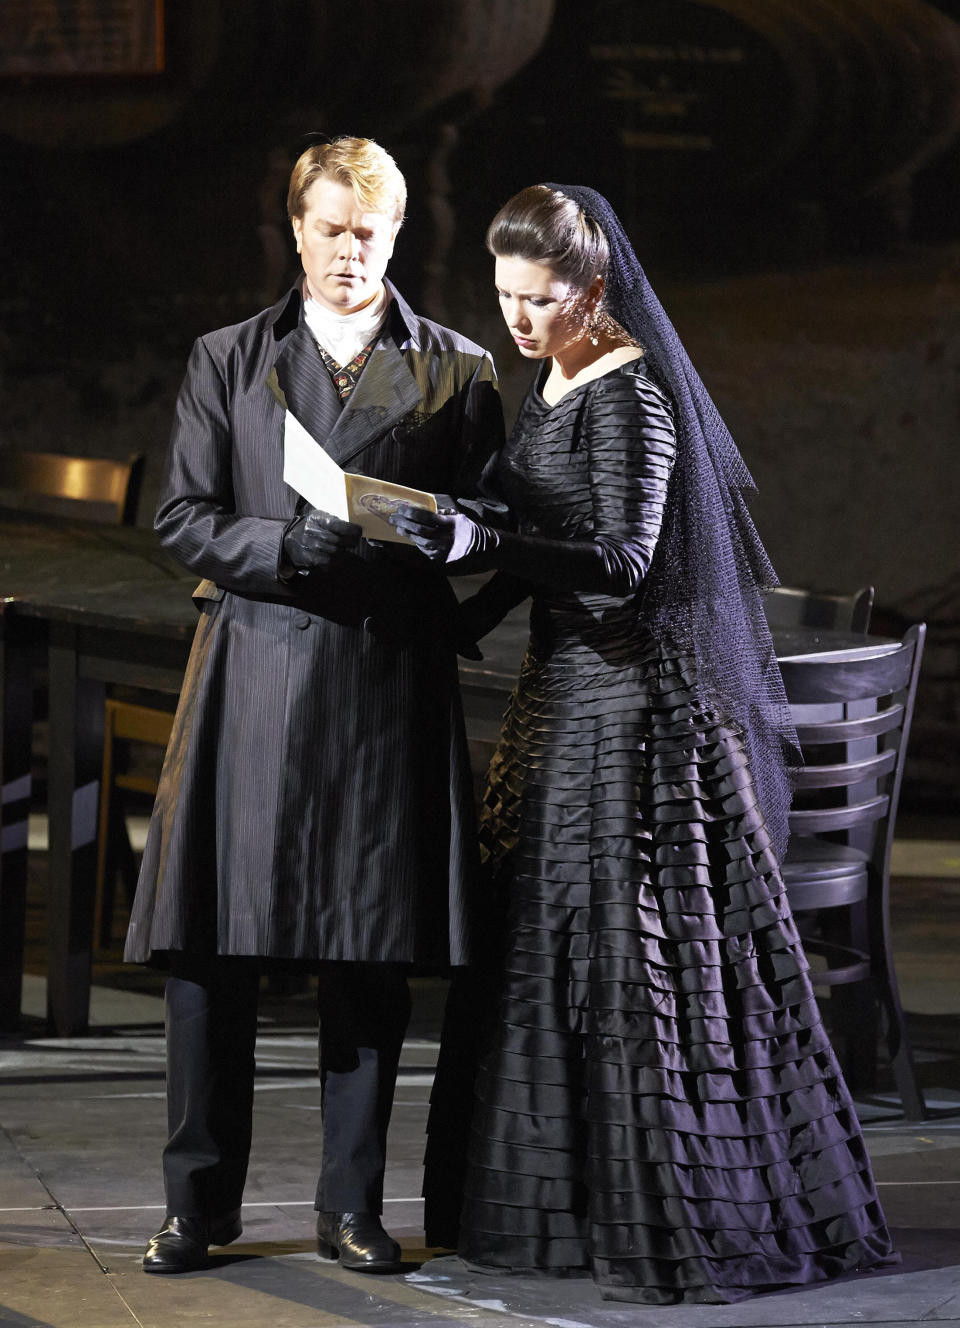 In this March 2, 2013 photo provided by the Vienna State Opera Toby Spence in the role of Don Ottavio and Marina Rebeka as Donna Anna perform during a dress rehearsal for Wolfgang Amadeus Mozart's opera "Don Giovanni" at the state opera in Vienna, Austria. (AP Photo/Vienna State Opera, Michael Poehn)